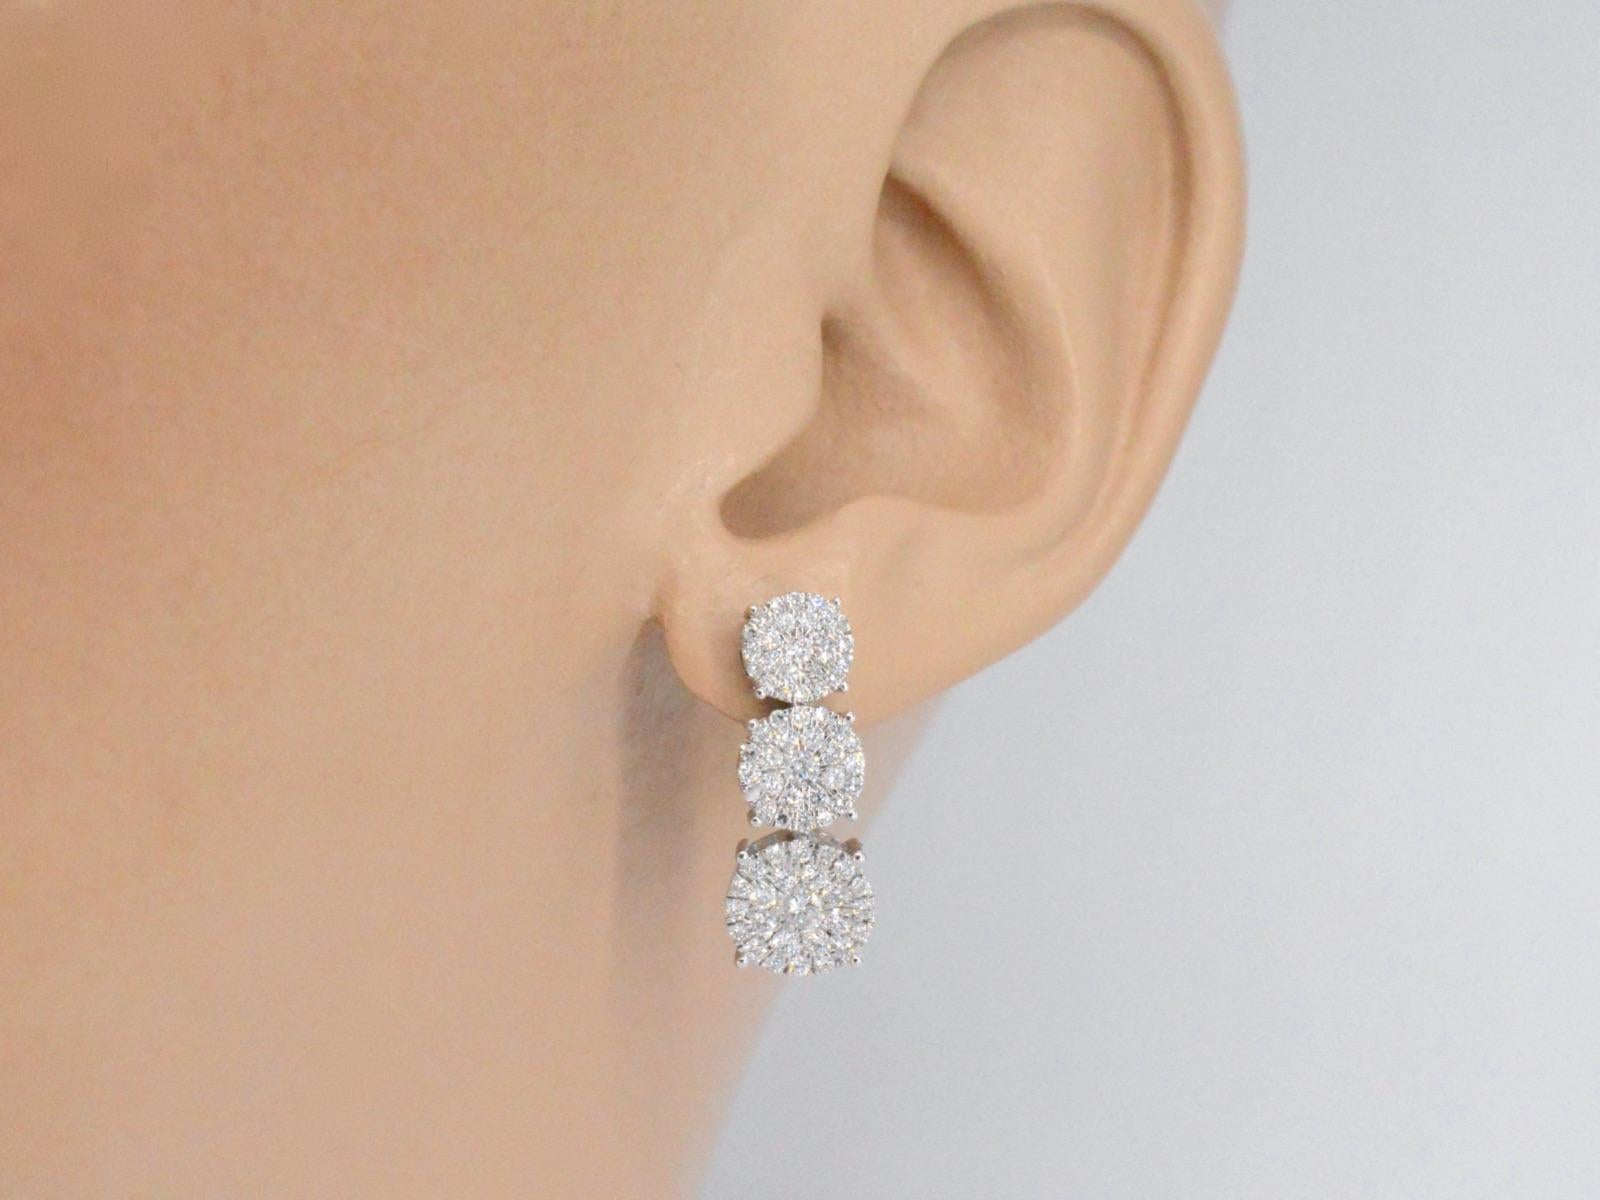 These stunning white gold earrings feature a total of 1.40 carats of diamonds, arranged in a beautiful and unique design. Three chatons of diamonds are arranged below each other, creating a cascading effect that adds depth and dimension to the